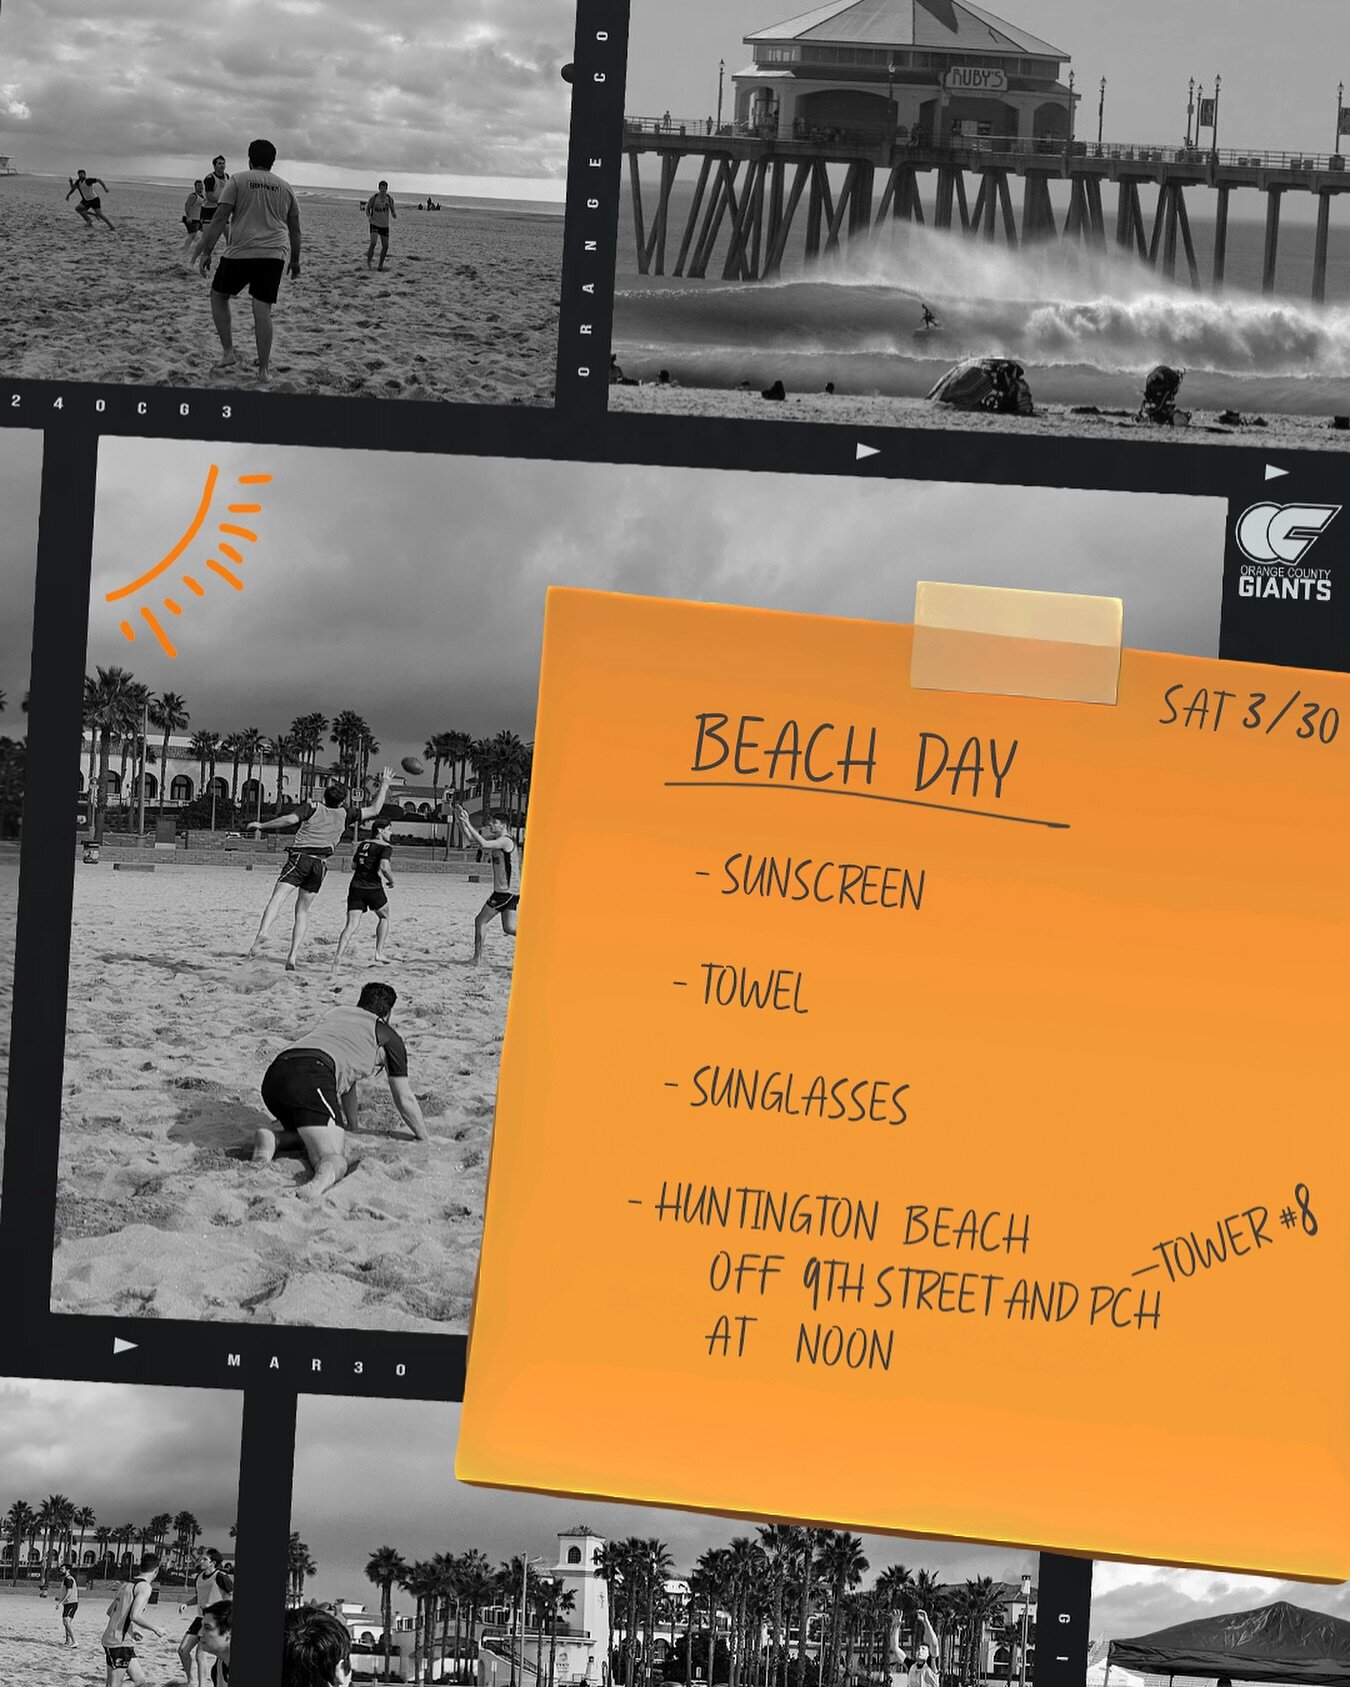 Beach day this Saturday!  Join us for some footy, cricket and a bit of fun in the sun 🏉🏏☀️
&zwnj;
Noon Saturday @ Between Tower 8 &amp; 9 Huntington Beach
801 Pacific Coast Highway, Huntington Beach, CA 92648
&zwnj;
And stick around after for a tou